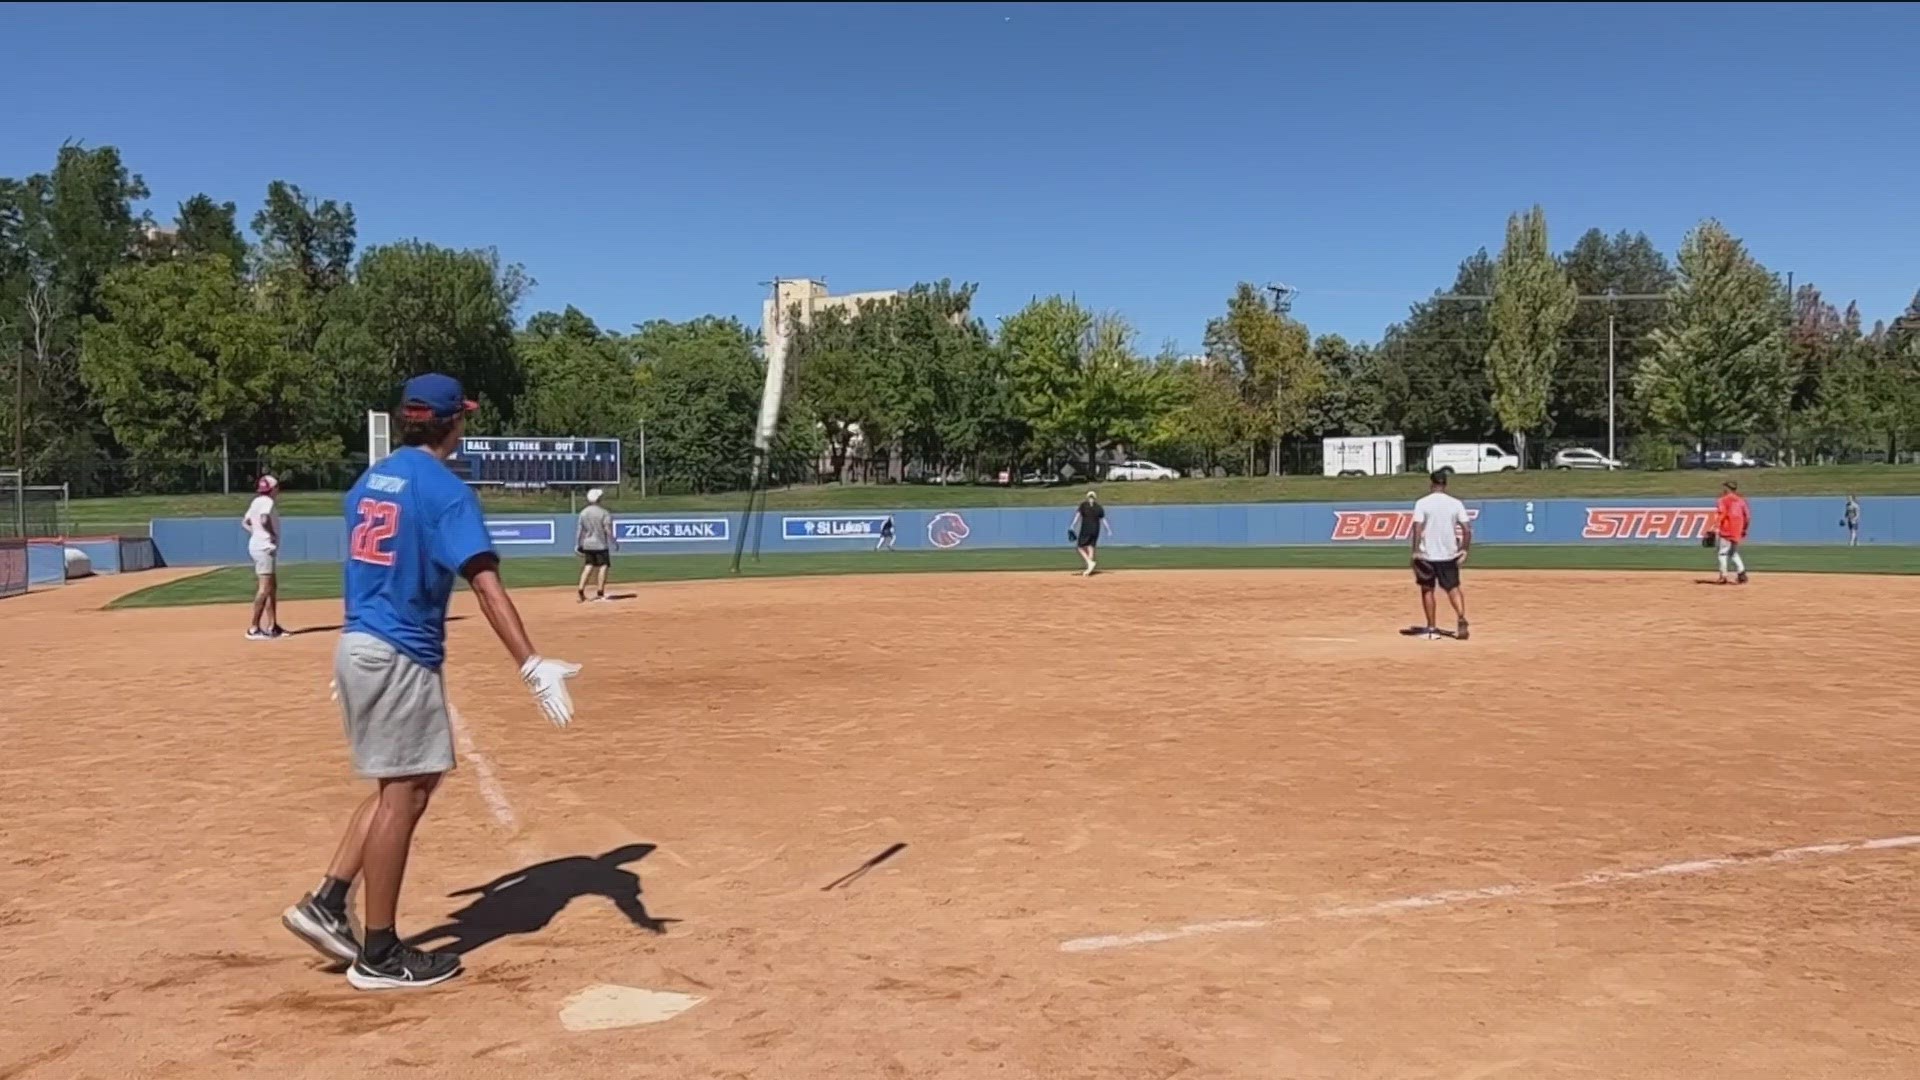 Check out the bat flip from Tyson Degenhart! It took extra innings to decide the Boise State Men's Basketball Softball Classic, but the players got the 19-16 win.